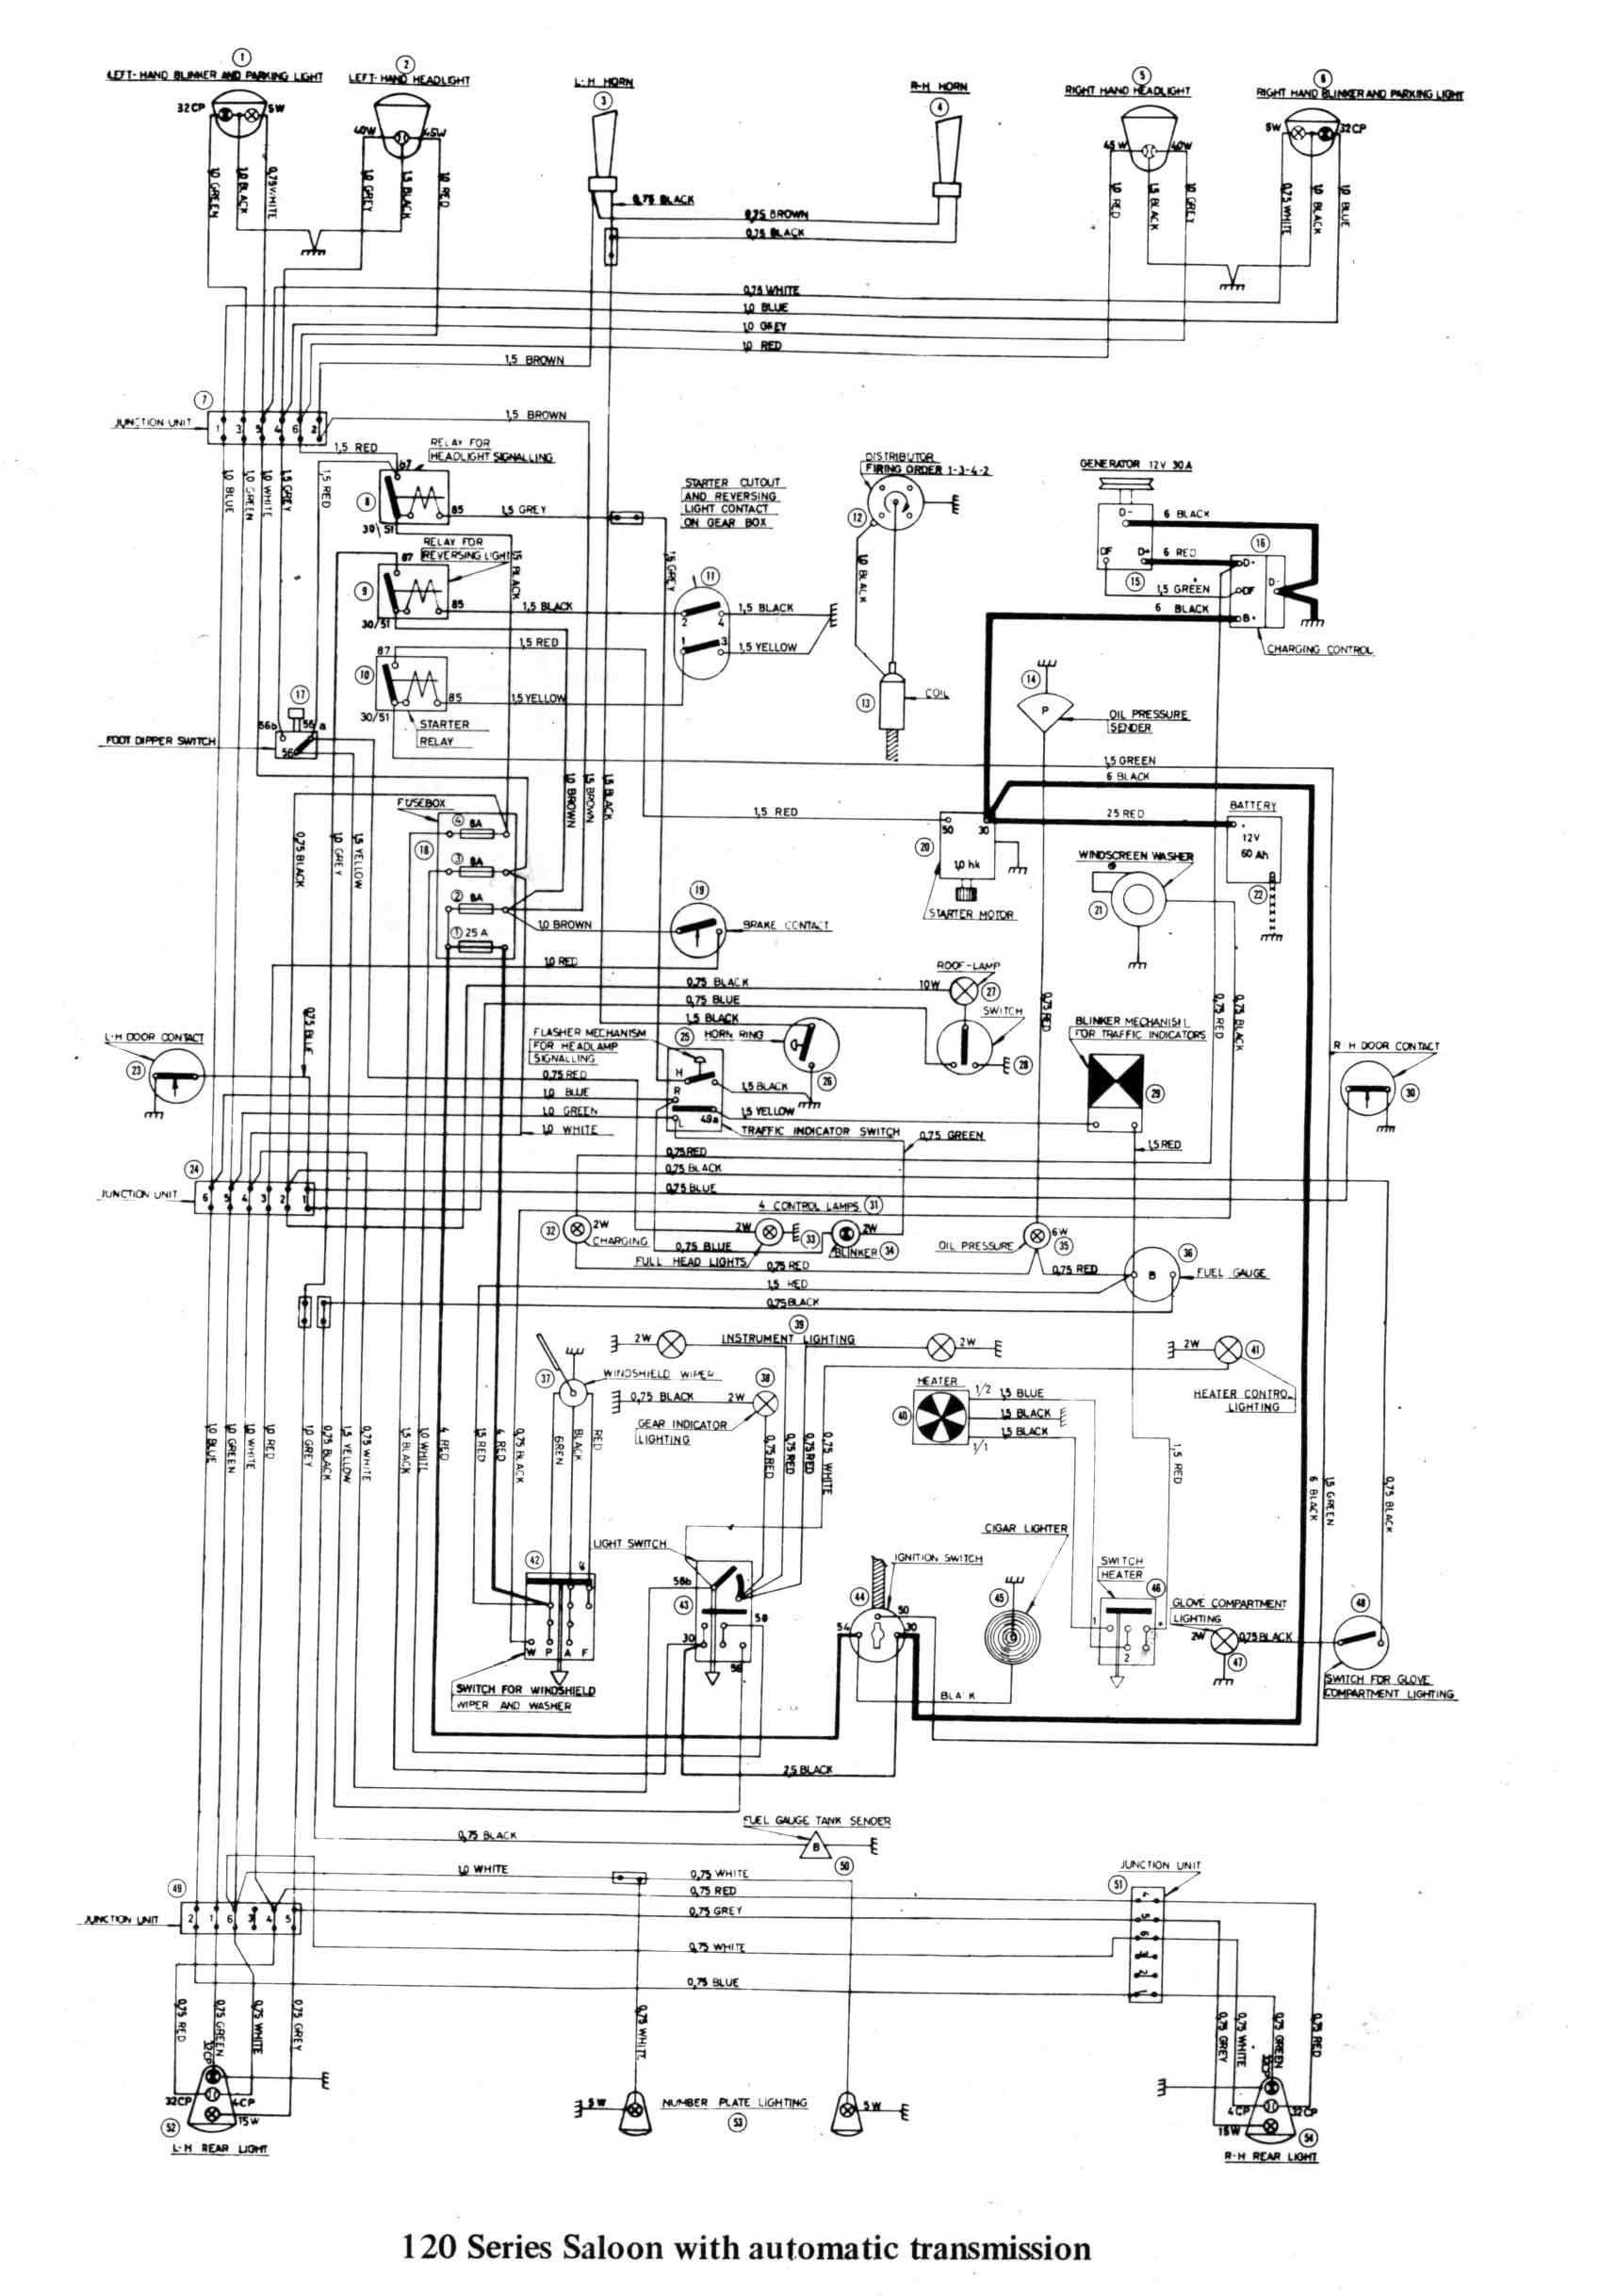 hid wiring diagram with relay Collection Wiring Diagram For Hid Relay New Relay Wire Diagram DOWNLOAD Wiring Diagram